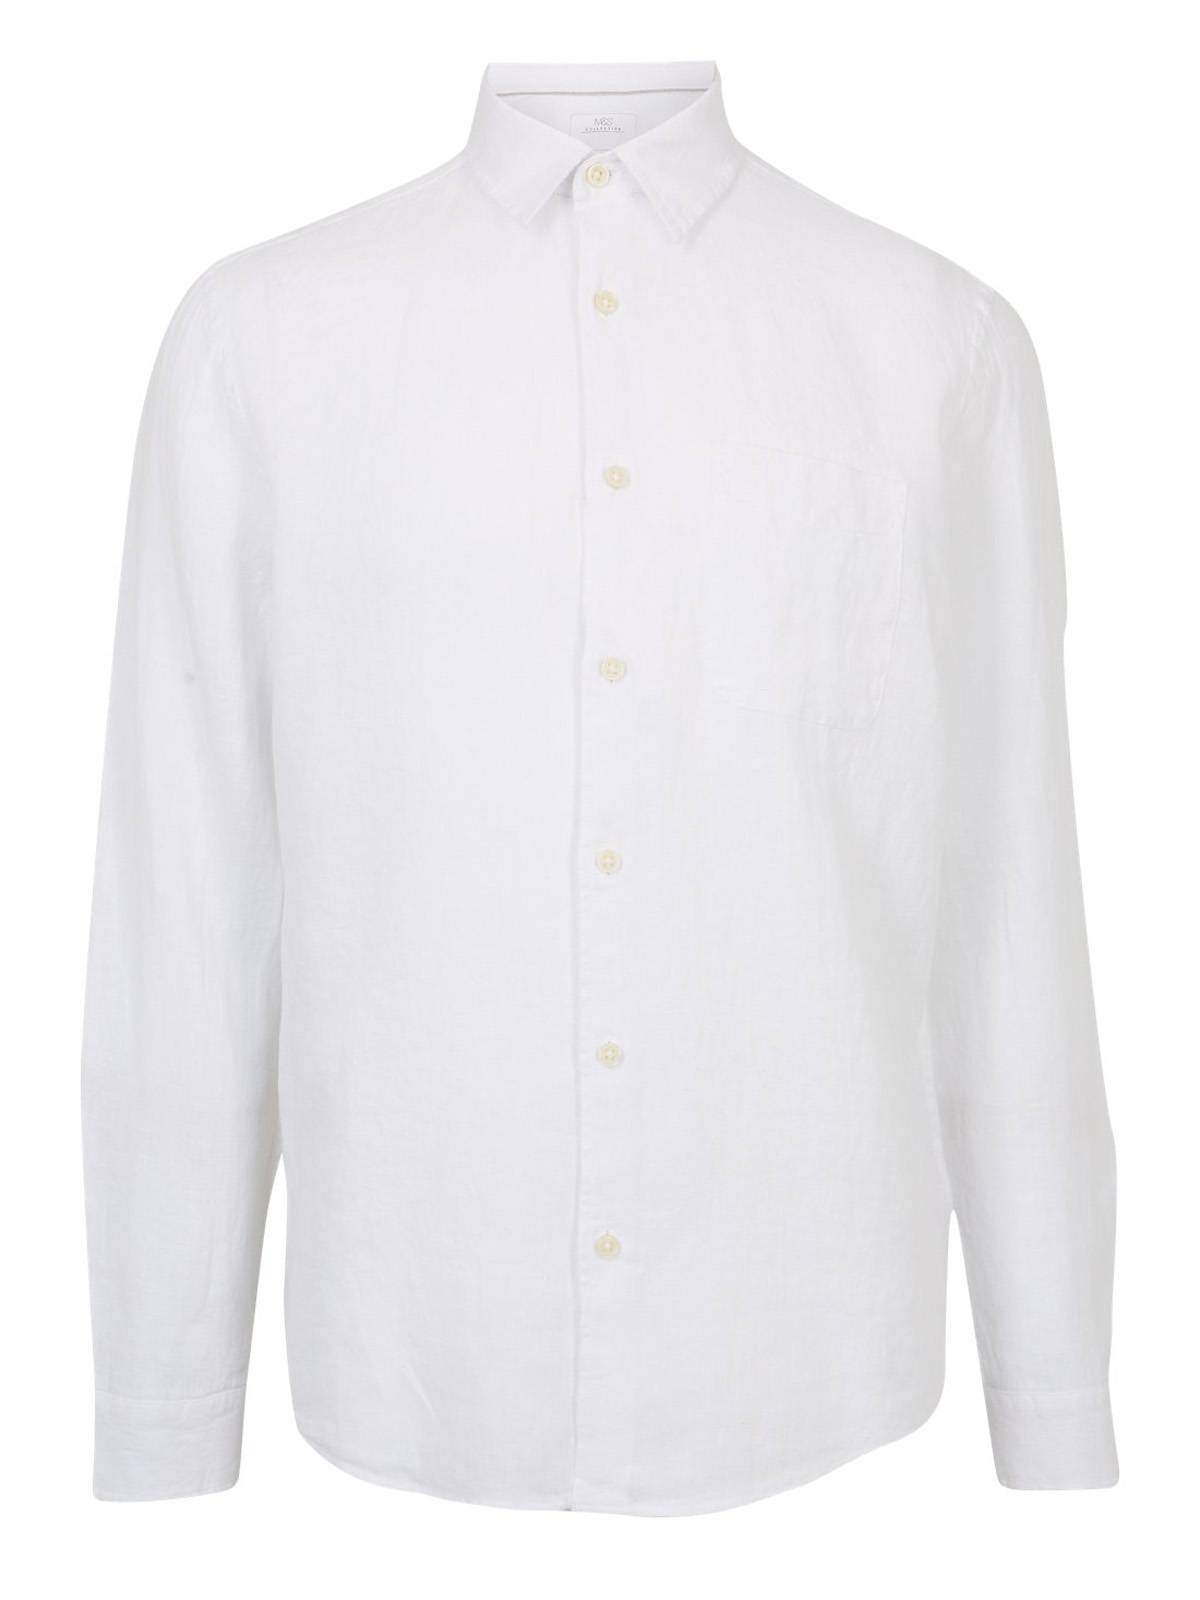 Marks and Spencer - - M&5 WHITE Mens Pure Linen Long Sleeve Shirt ...